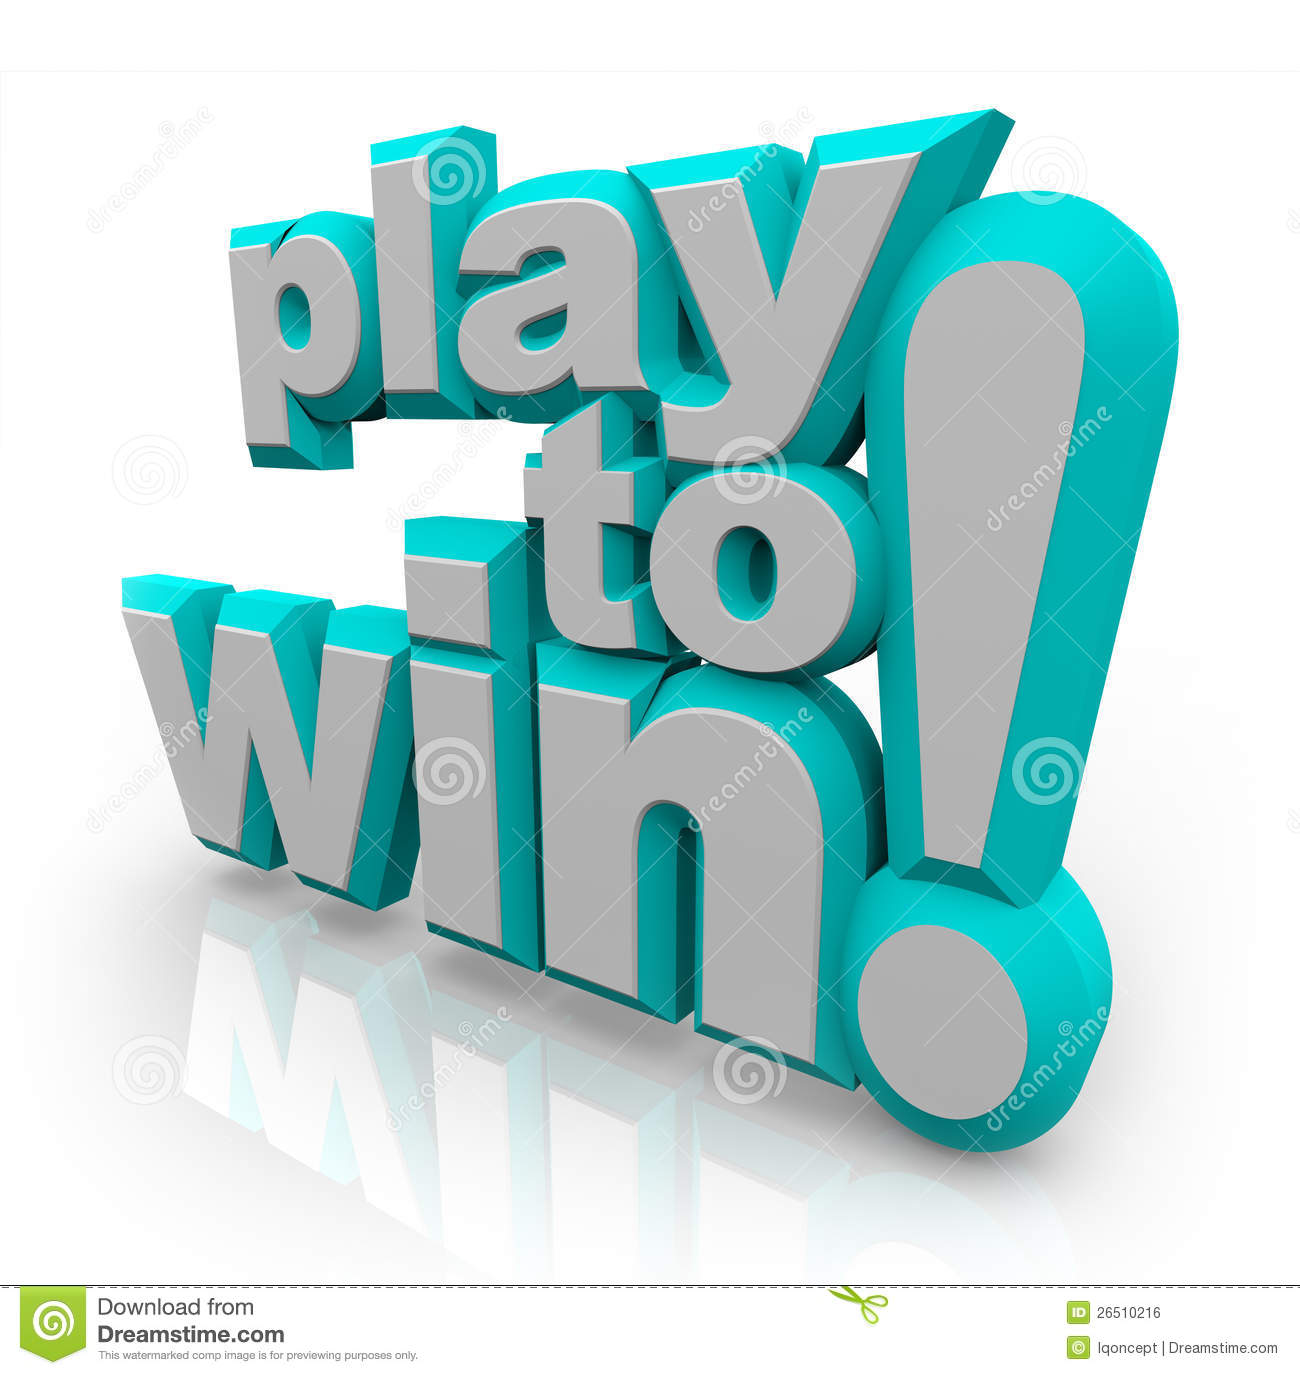 The Words Play To Win In 3d Lettering To Represent Determination And A